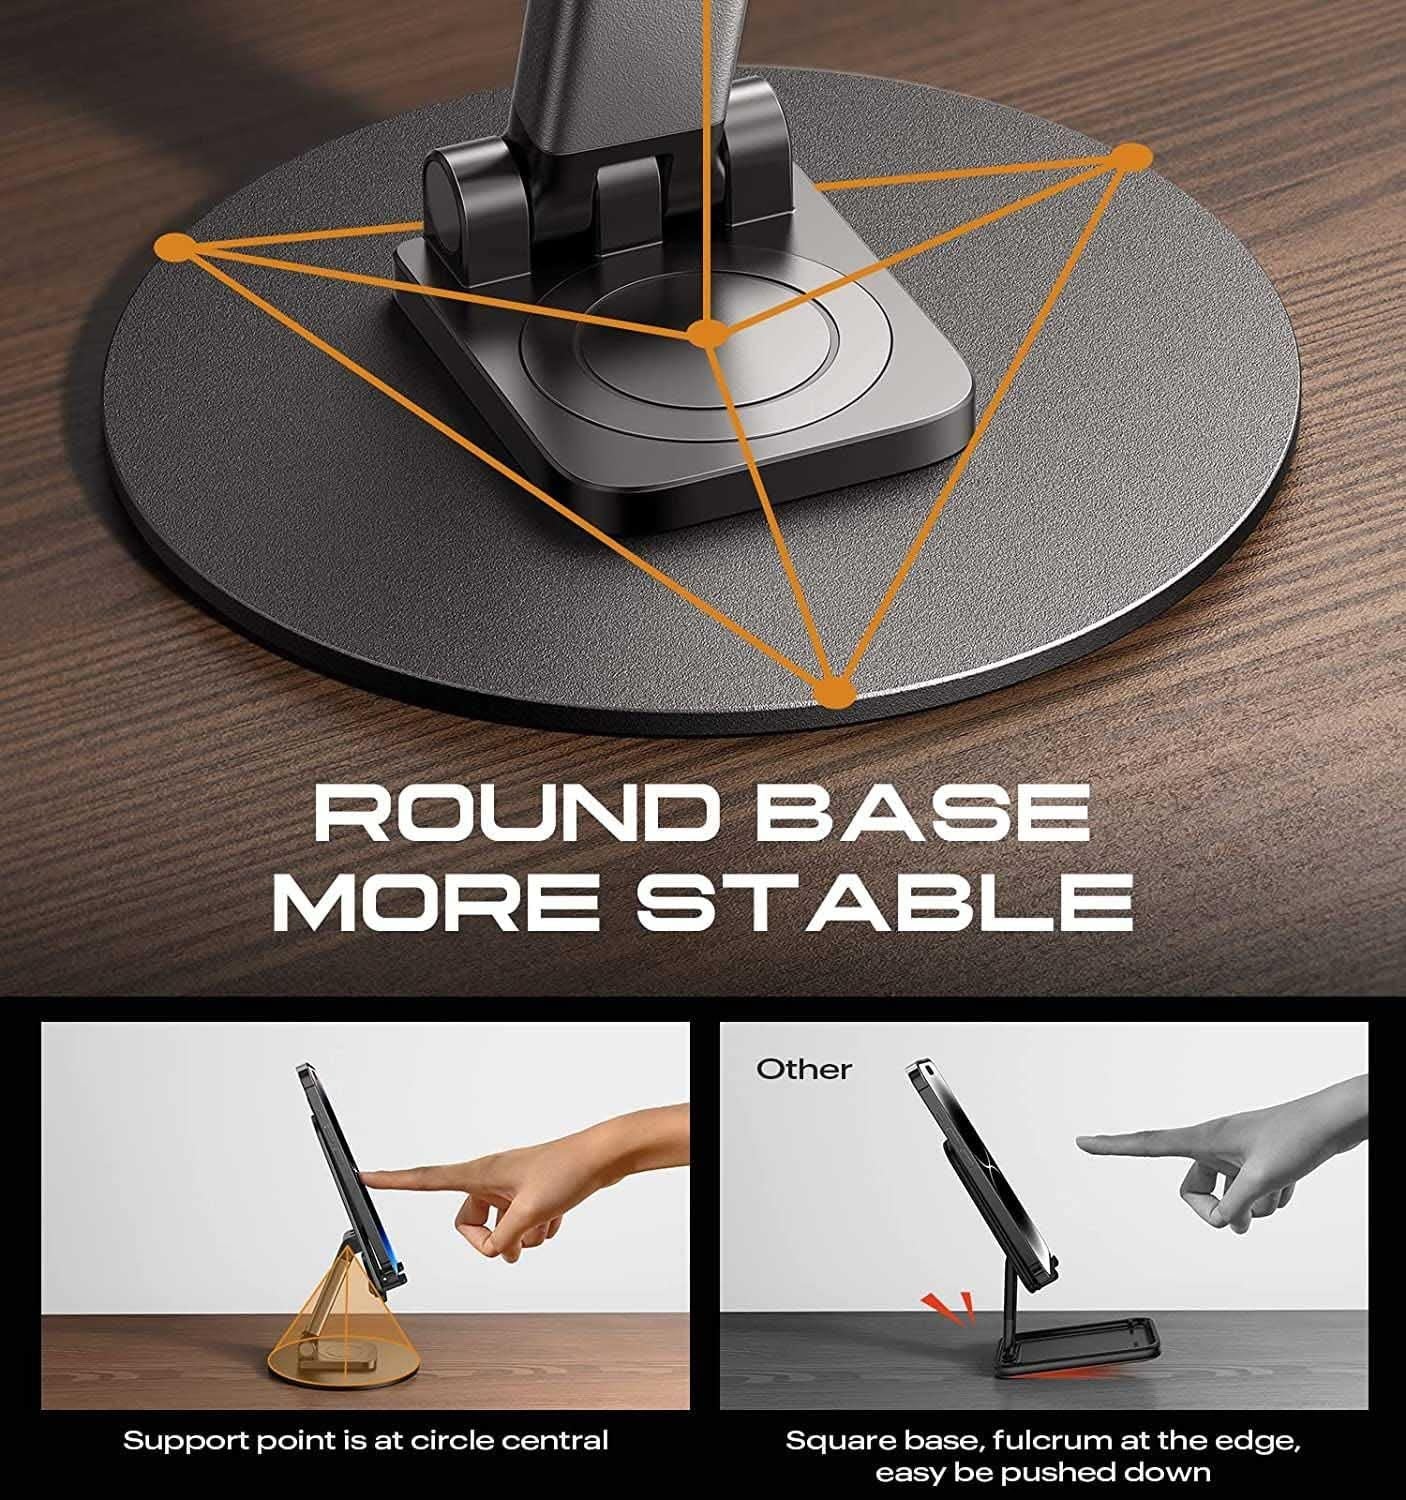 360 Mobile Stand